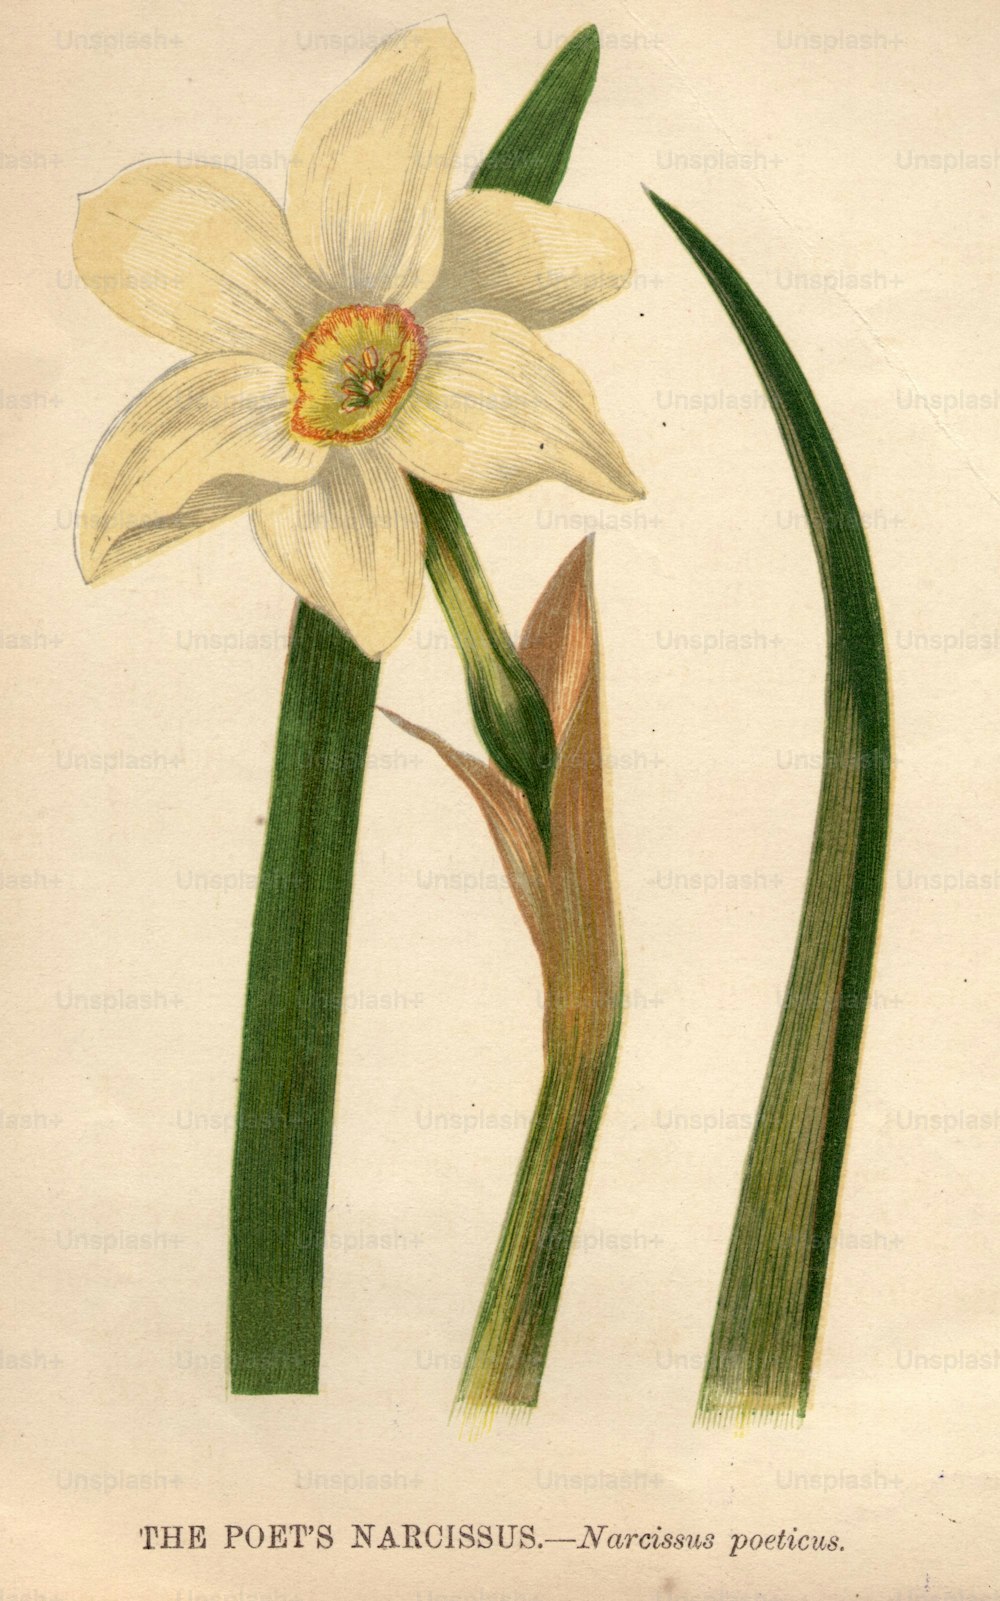 circa 1800:  The poet's narcissus, or narcissus poeticus.  (Photo by Hulton Archive/Getty Images)